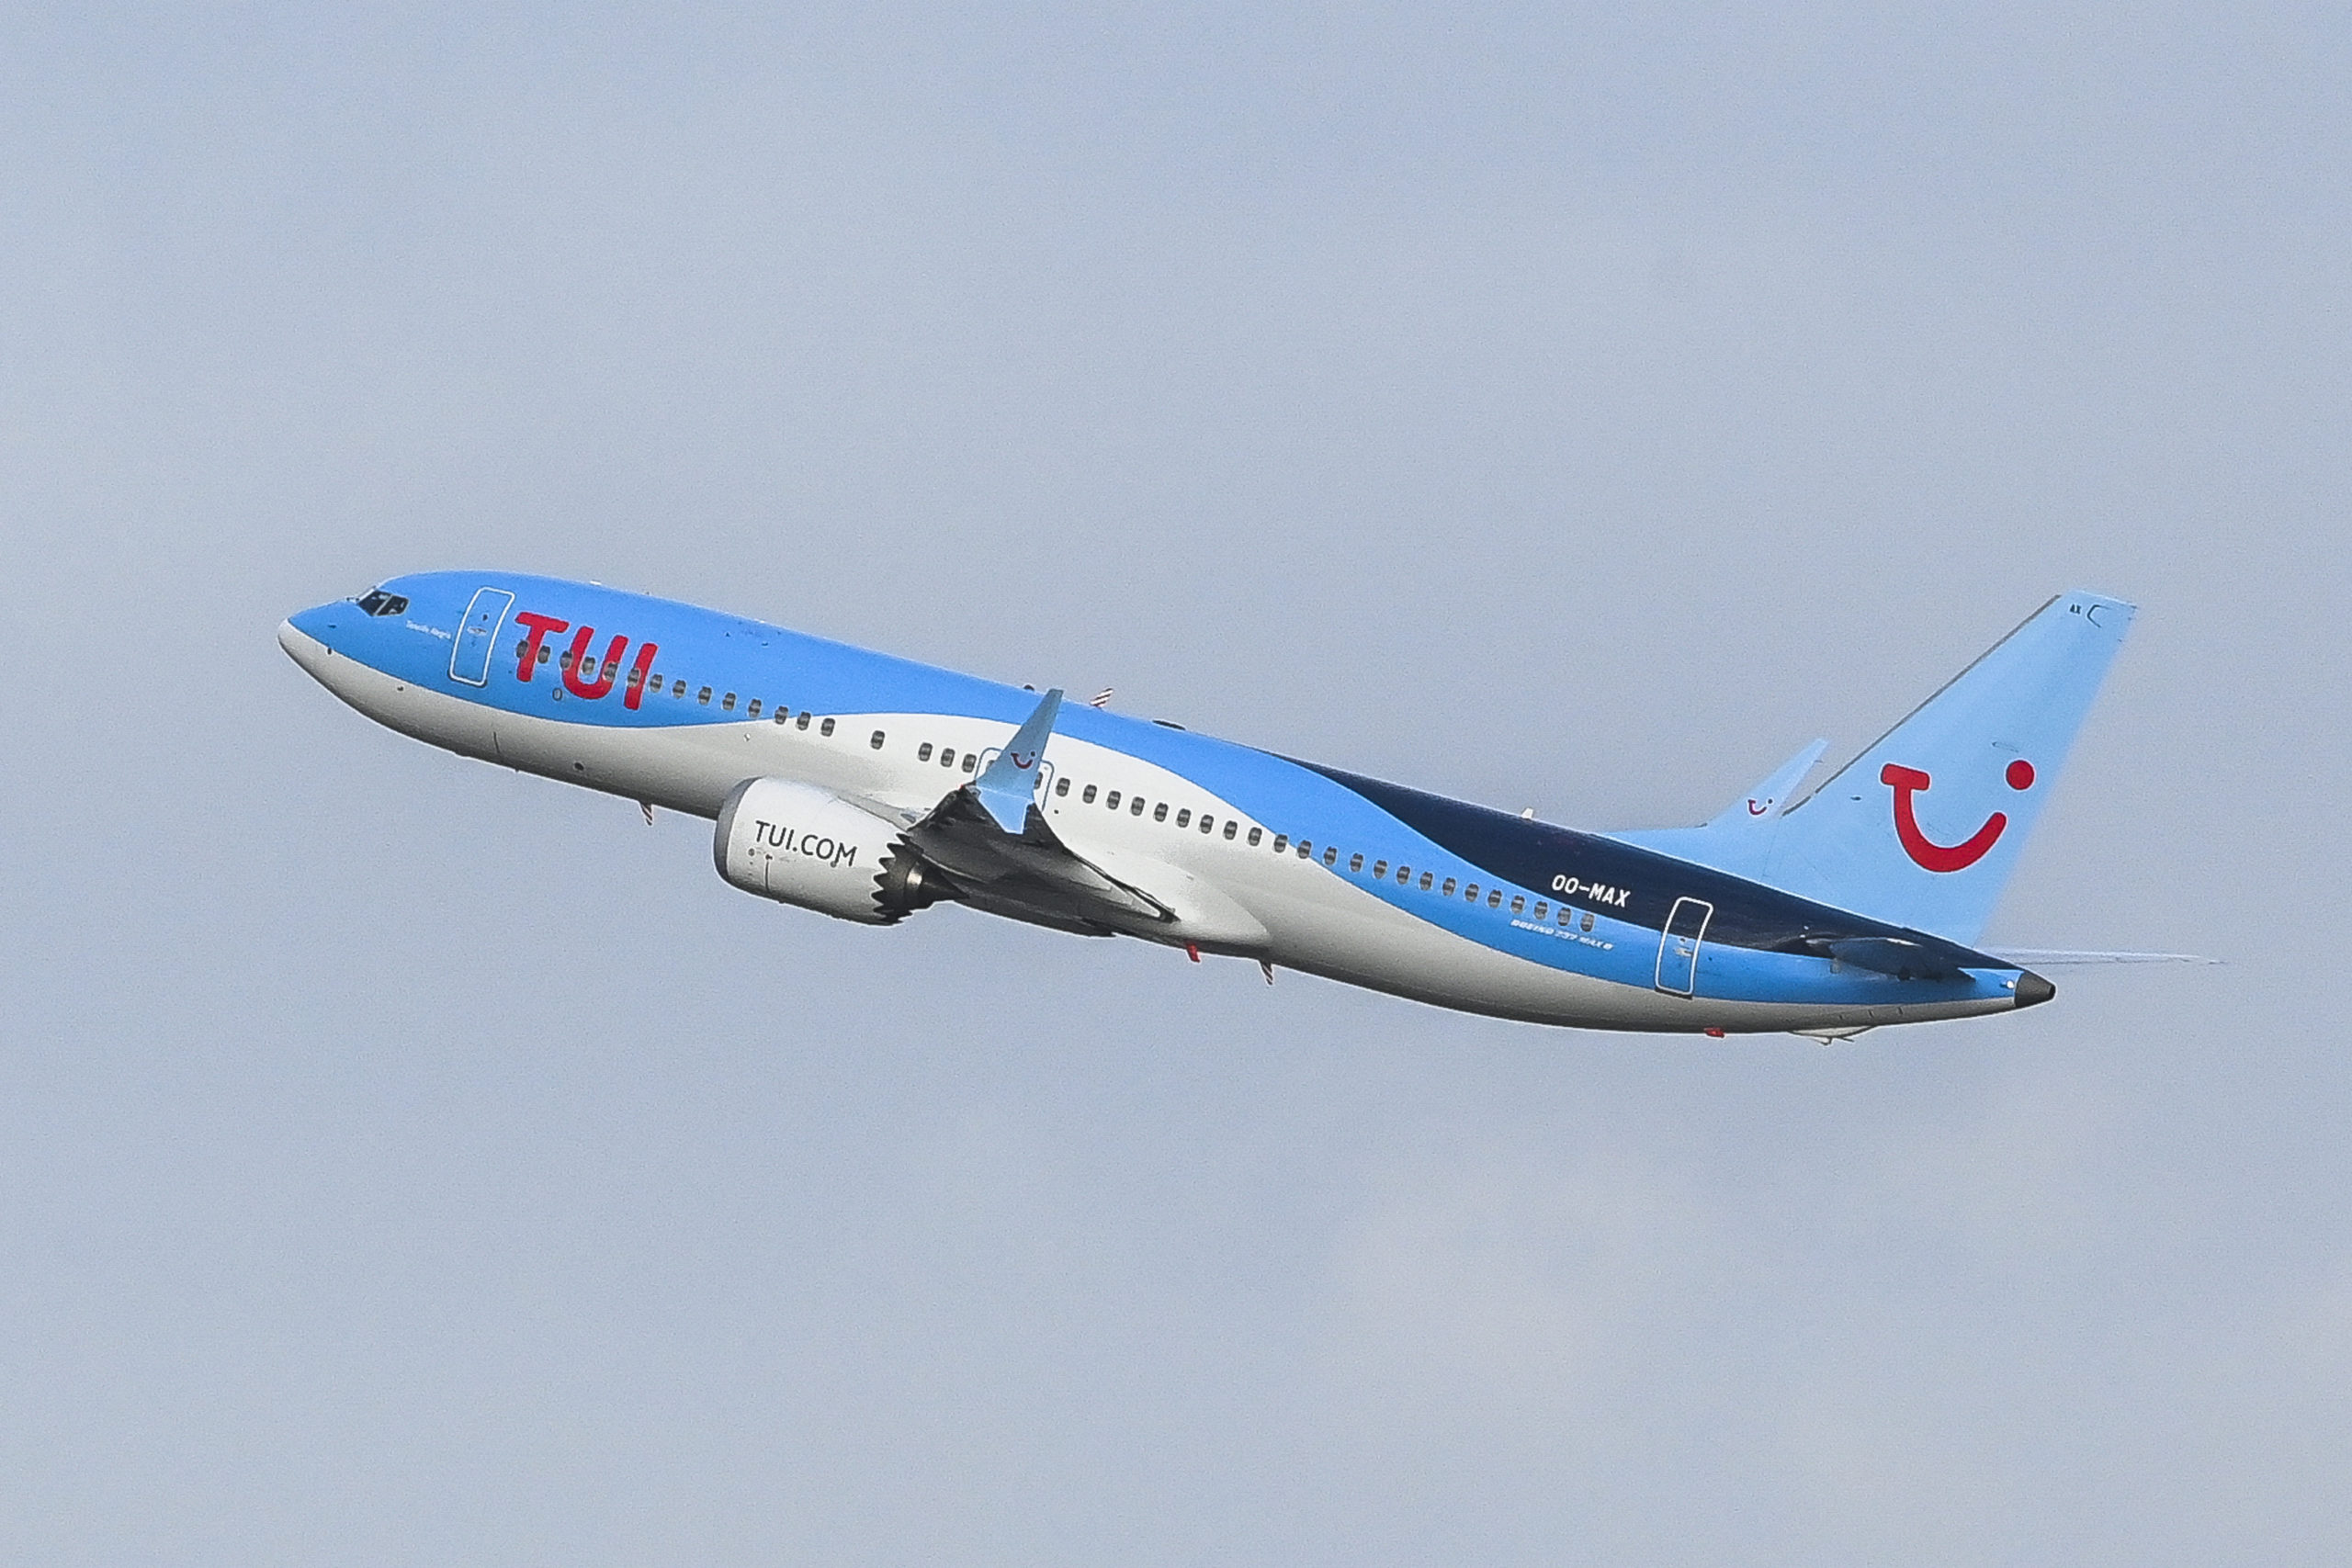 Belgium gives green light for TUI’s Boeing 737 Max